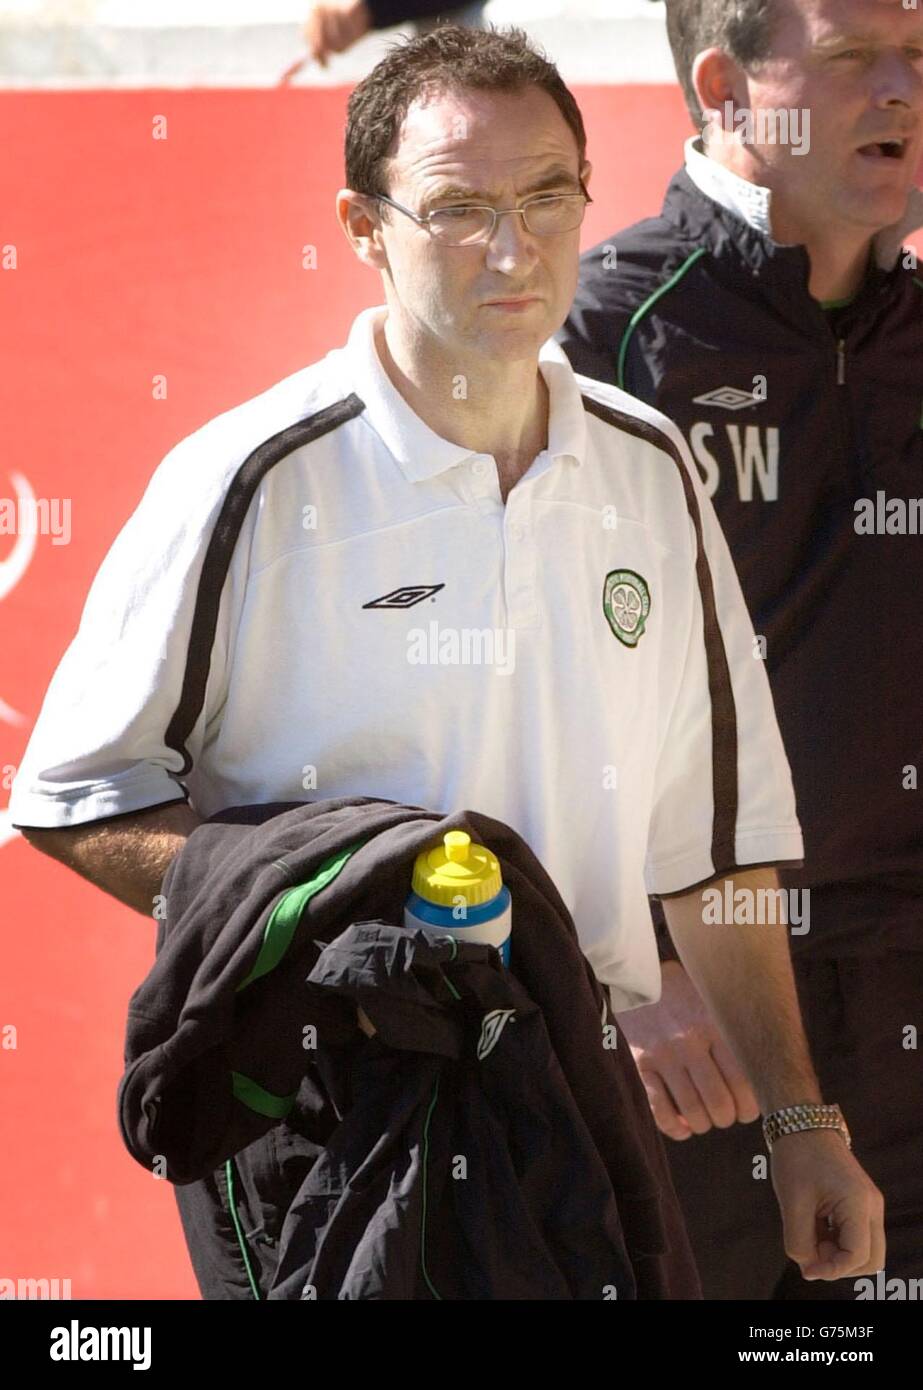 Celtic manager Martin O'Neill during the match in the Bank of Scotland Scottish Premier League at Aberdeen's Pittodrie stadium. Stock Photo